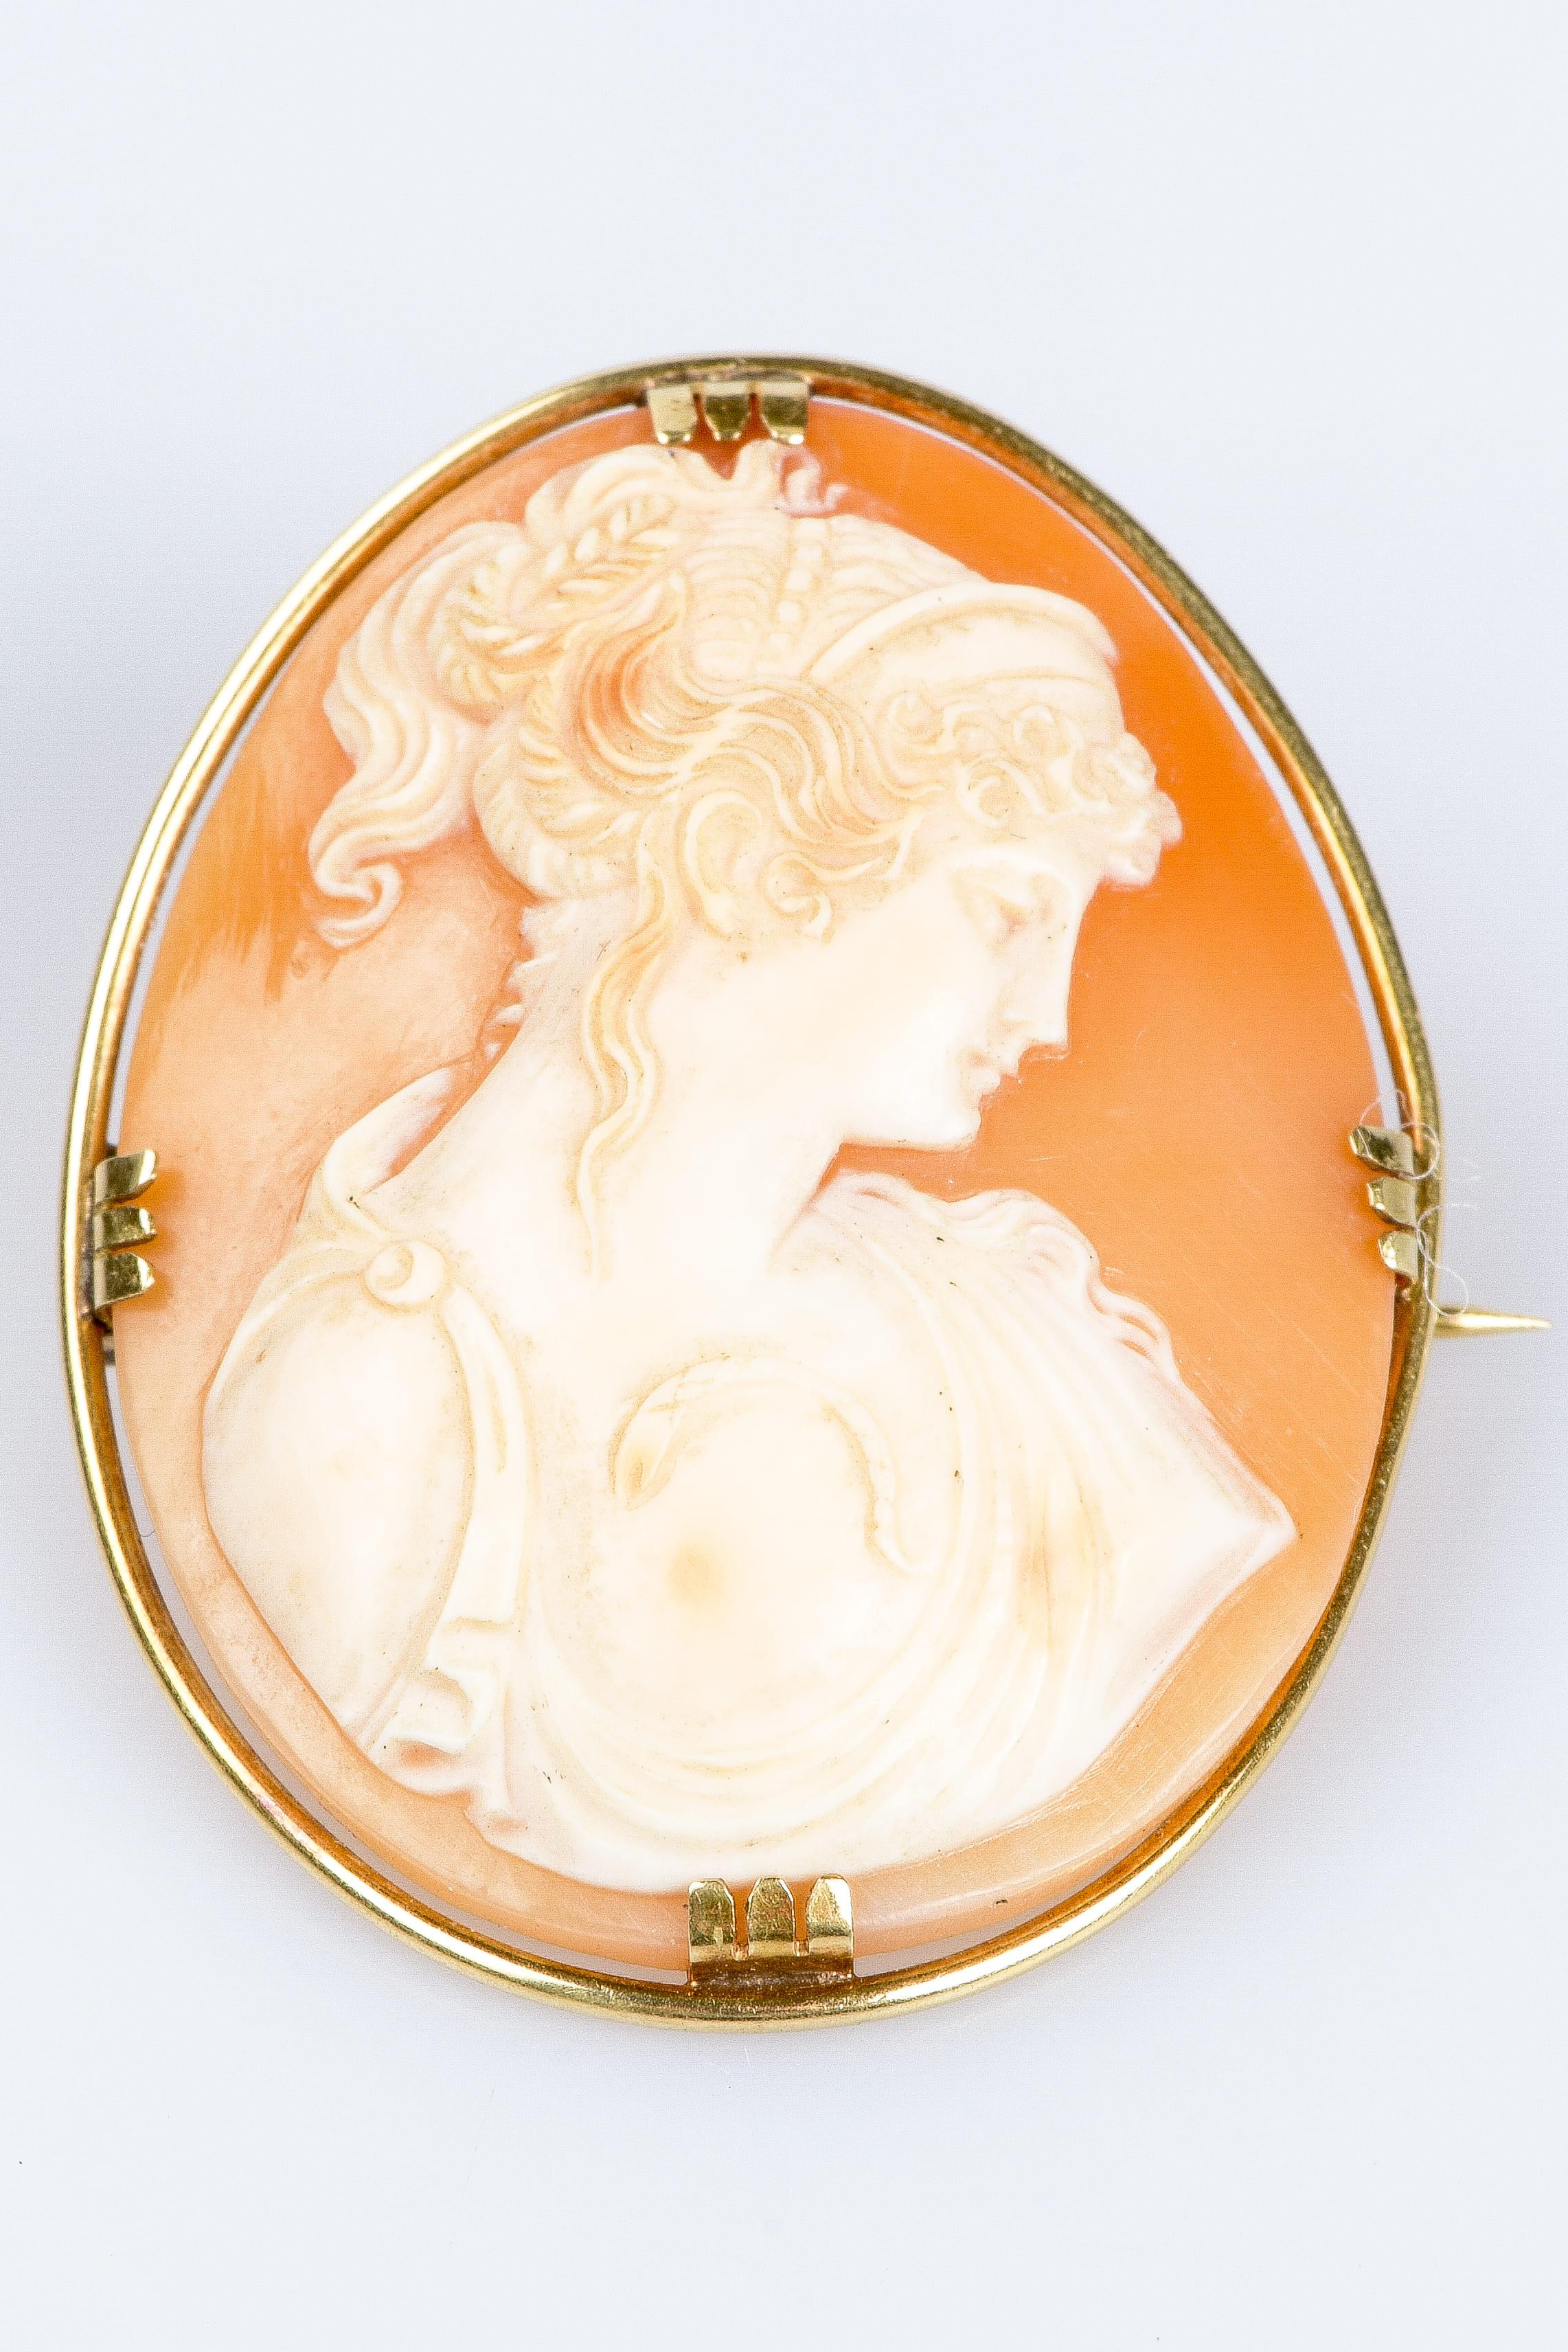 Vintage brooch in 18 carat yellow gold decorated with a cameo with the bust pattern of woman in profile. This high quality jewel combines classic and timeless elegance. The pin is removable. This brooch can be worn as an accessory on a coat, sash,